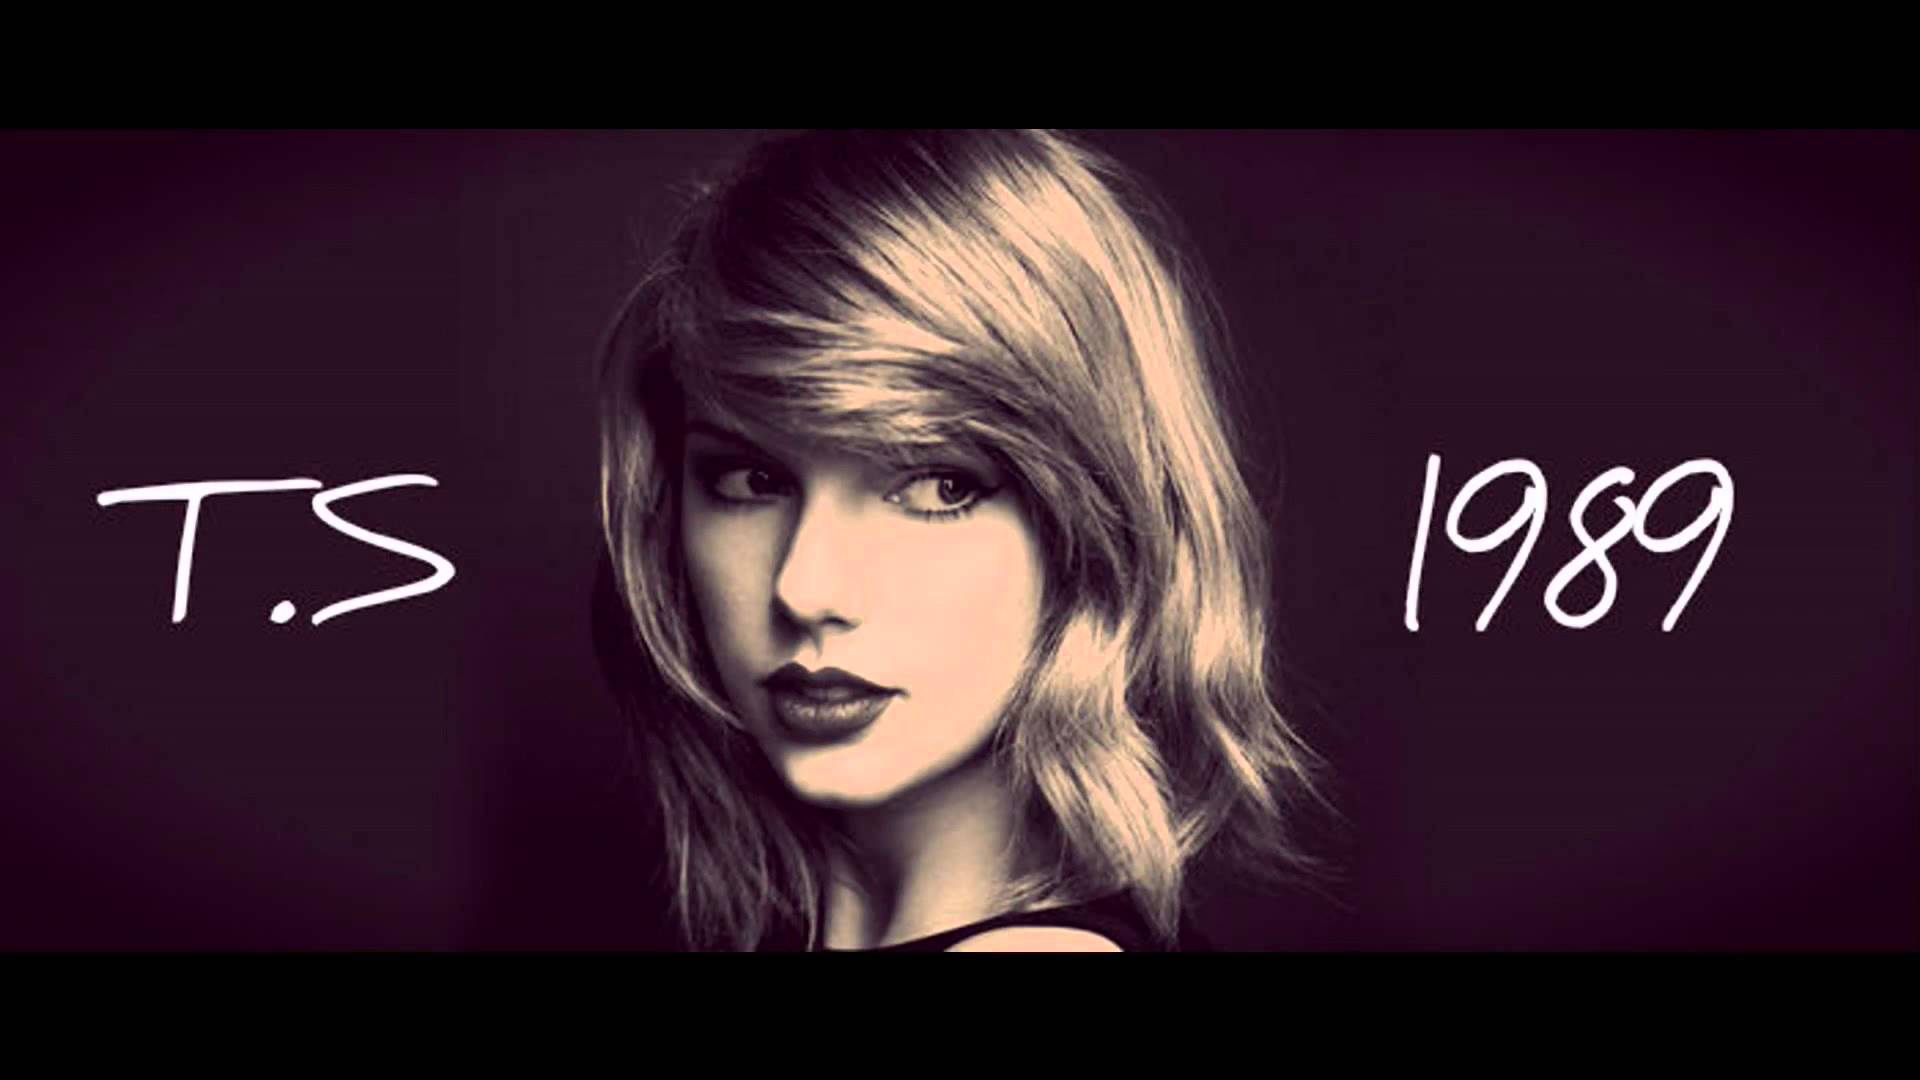 Free download Taylor Swift 1989 World Tour [1920x1080] for your Desktop, Mobile & Tablet. Explore Taylor Swift 1989 Wallpaper. Taylor Swift 1989 Wallpaper, Taylor Swift 1989 Wallpaper, Taylor Swift Desktop Wallpaper 1989